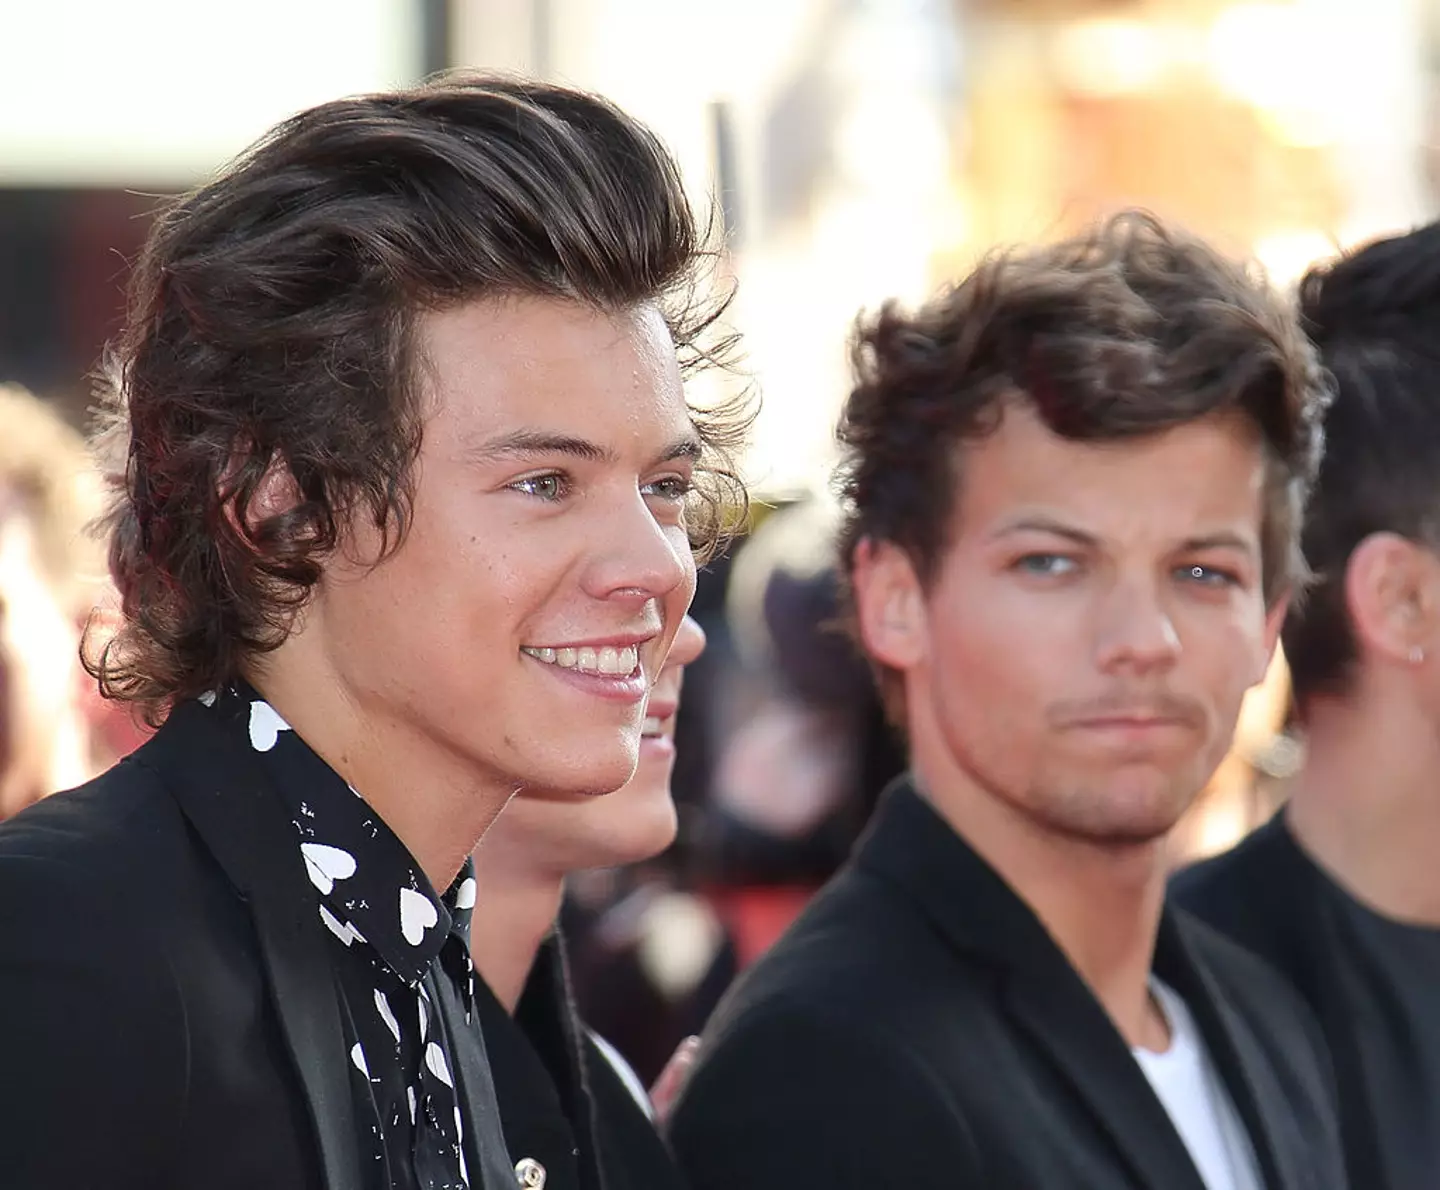 Harry Styles and Louis Tomlinson have faced a long-standing rumour of romance. Credit:Mike Marsland/WireImage/Getty